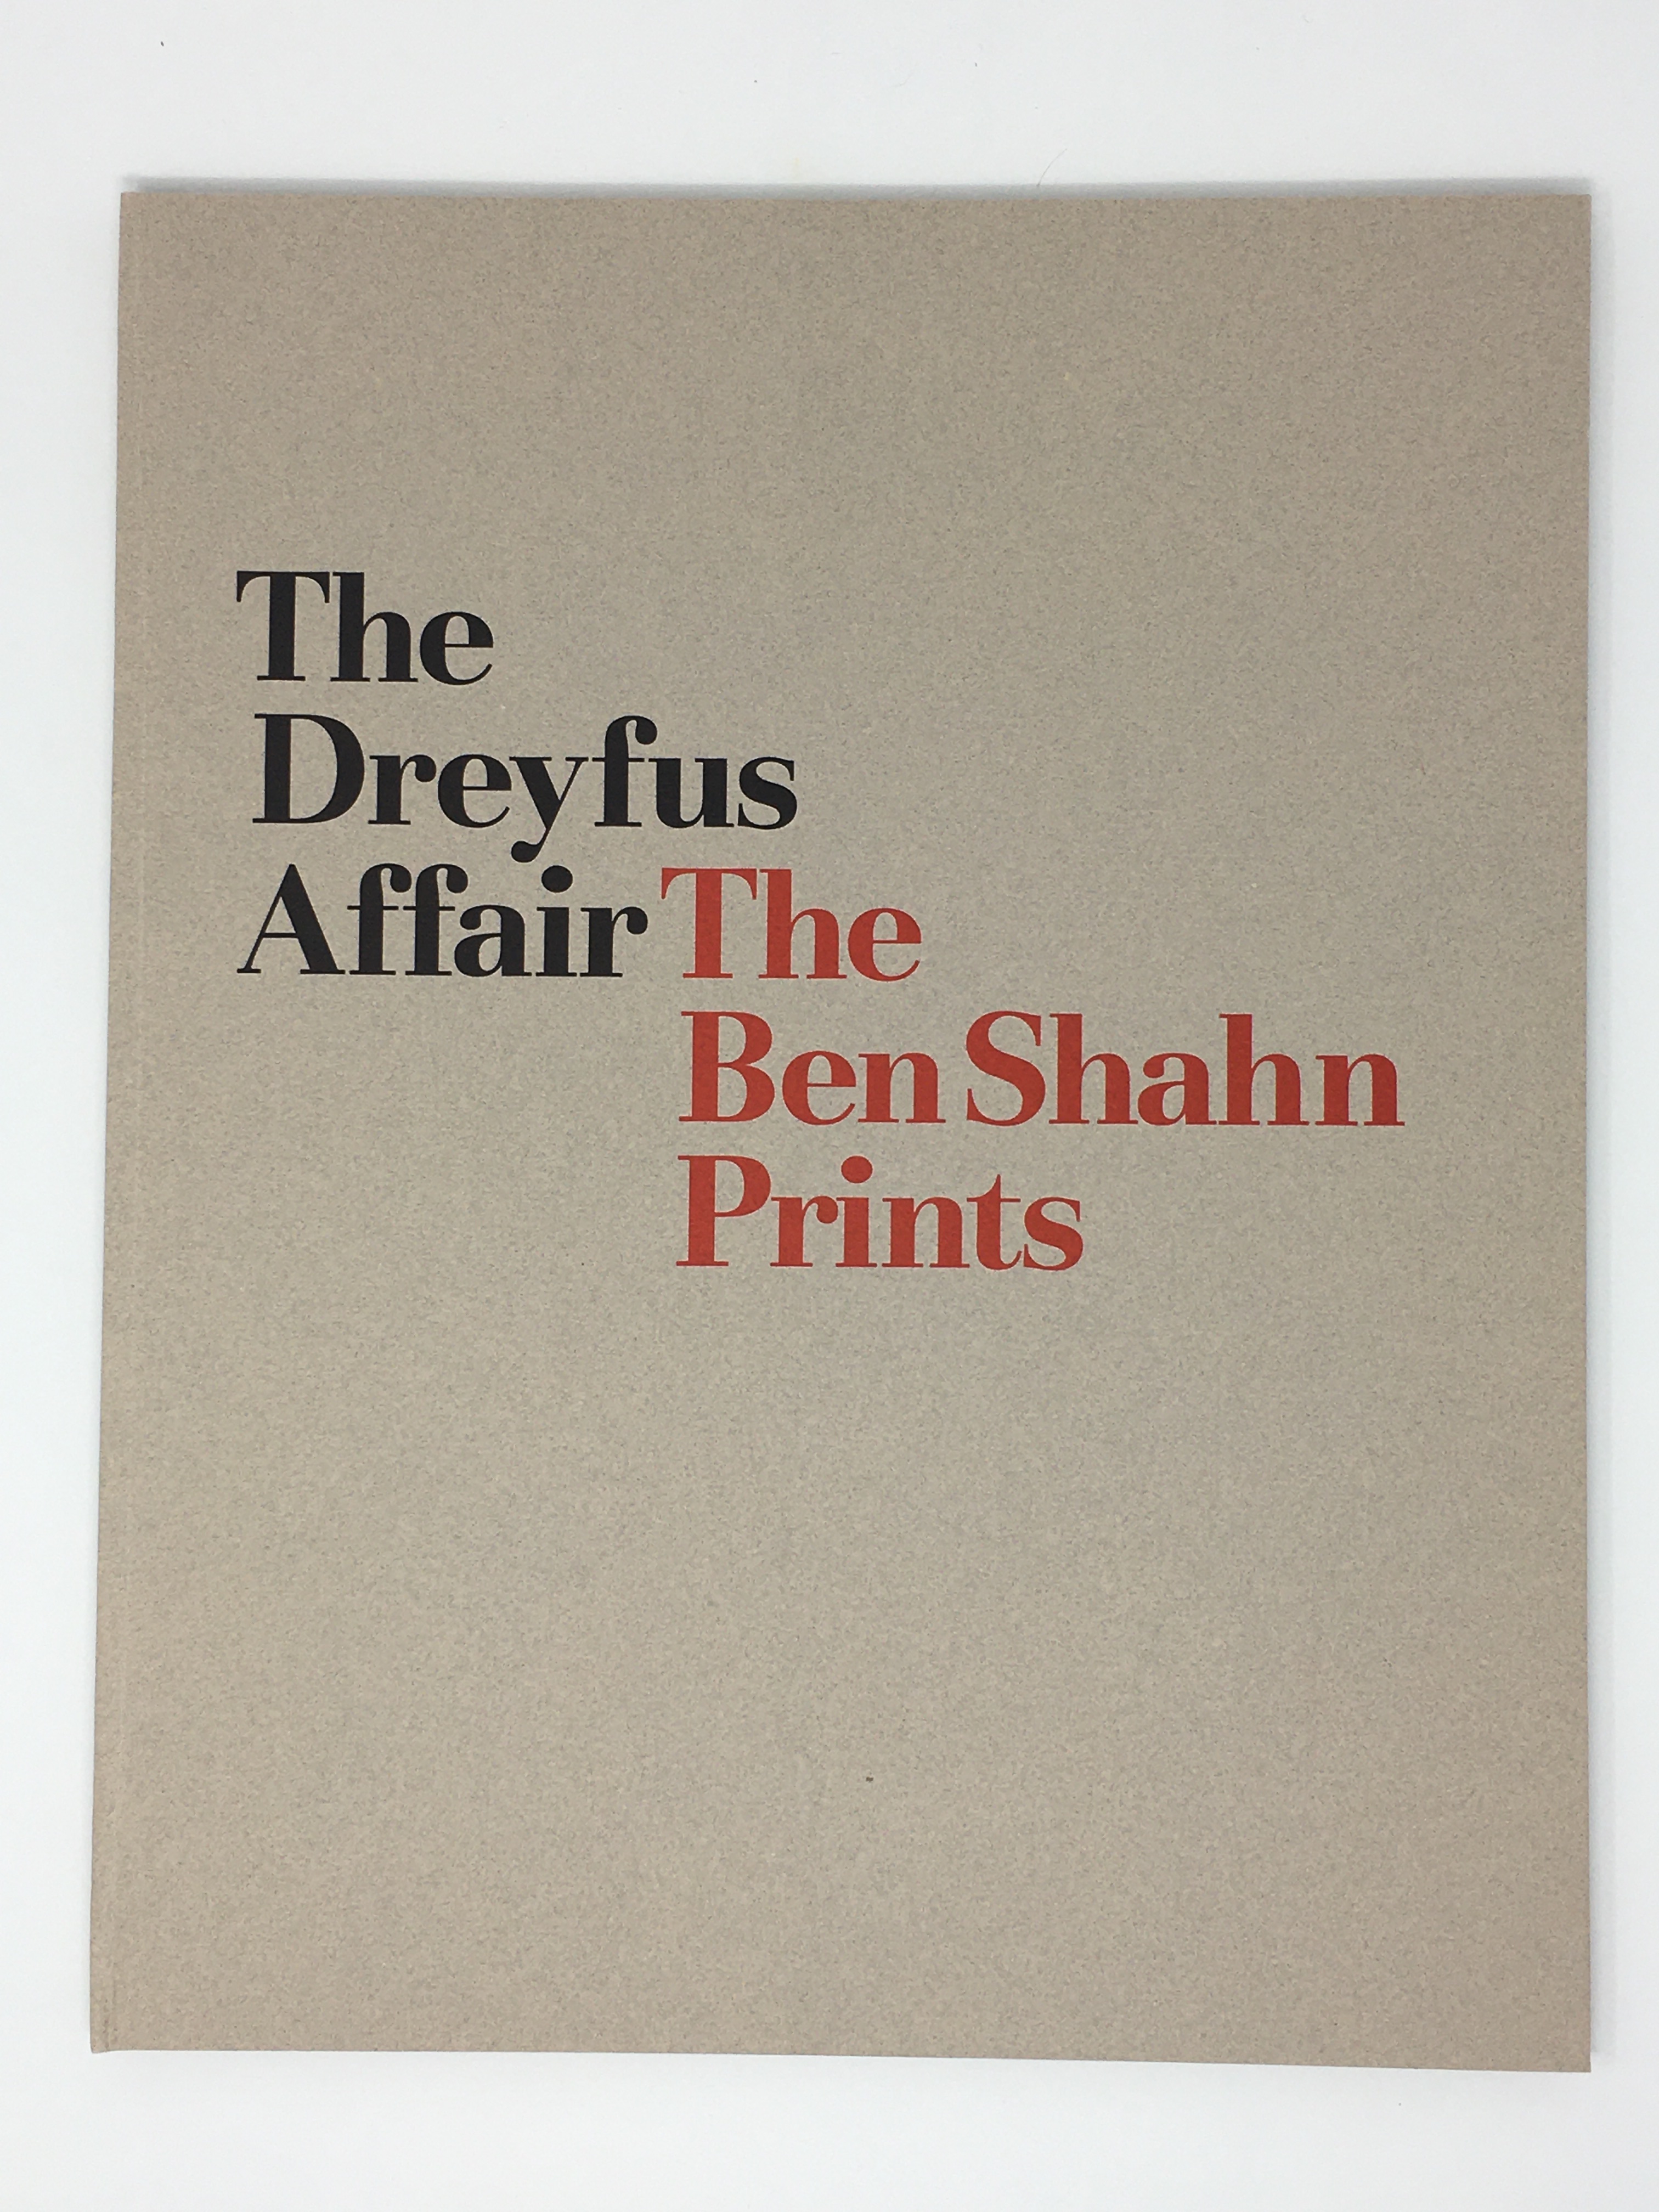 Dreyfus Affair - Book Collection featuring The Ben Shahn Prints (Limited First Edition) - Image 6 of 73